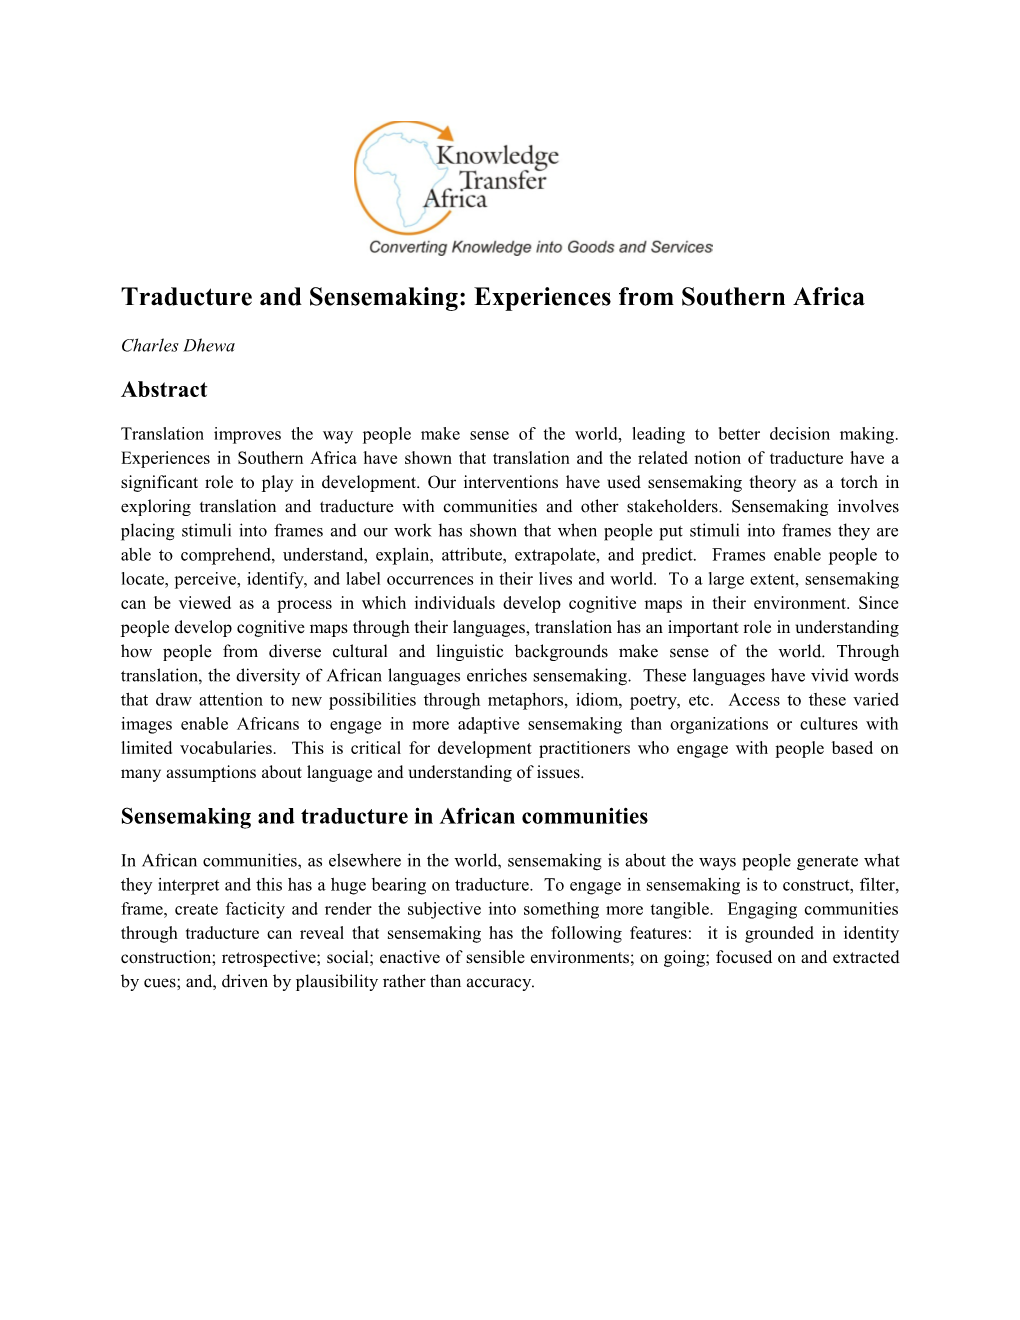 Traducture and Sensemaking: Experiences from Southern Africa